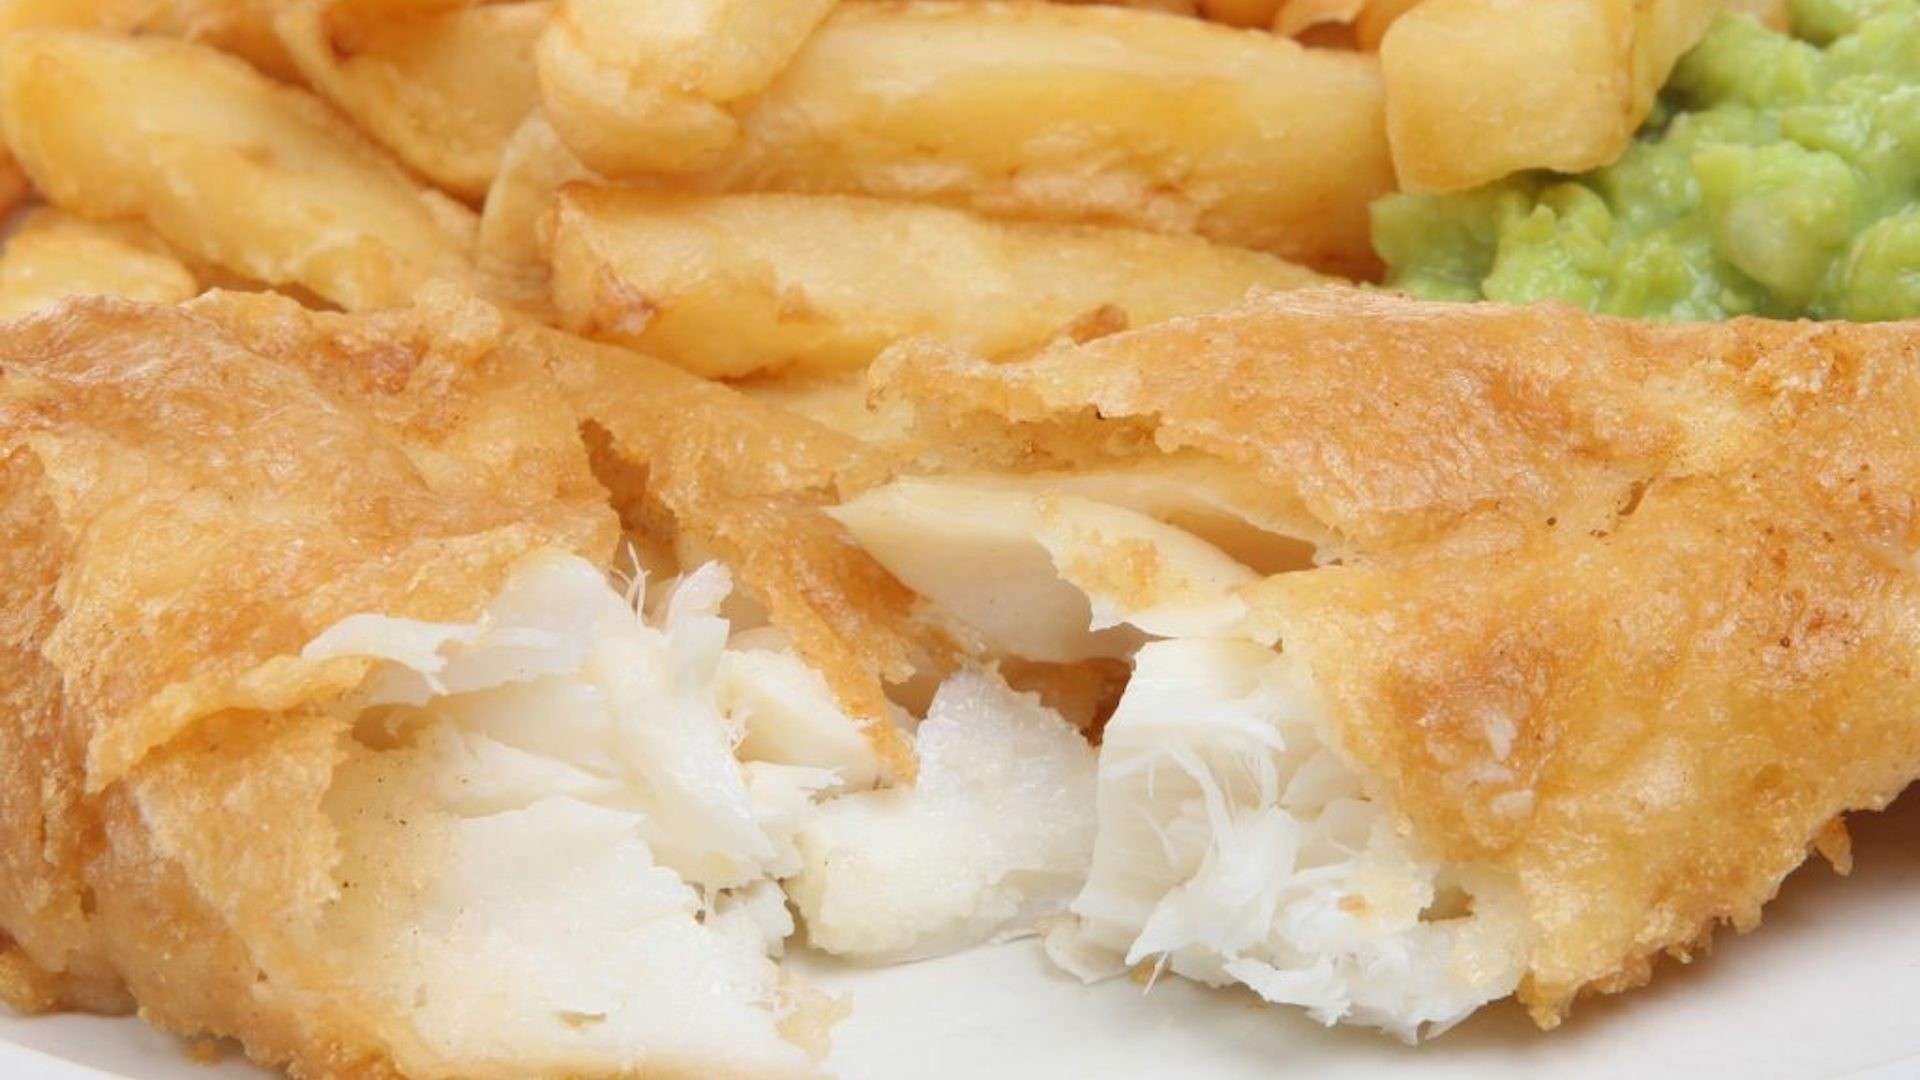 Asian Style Fish & Chips